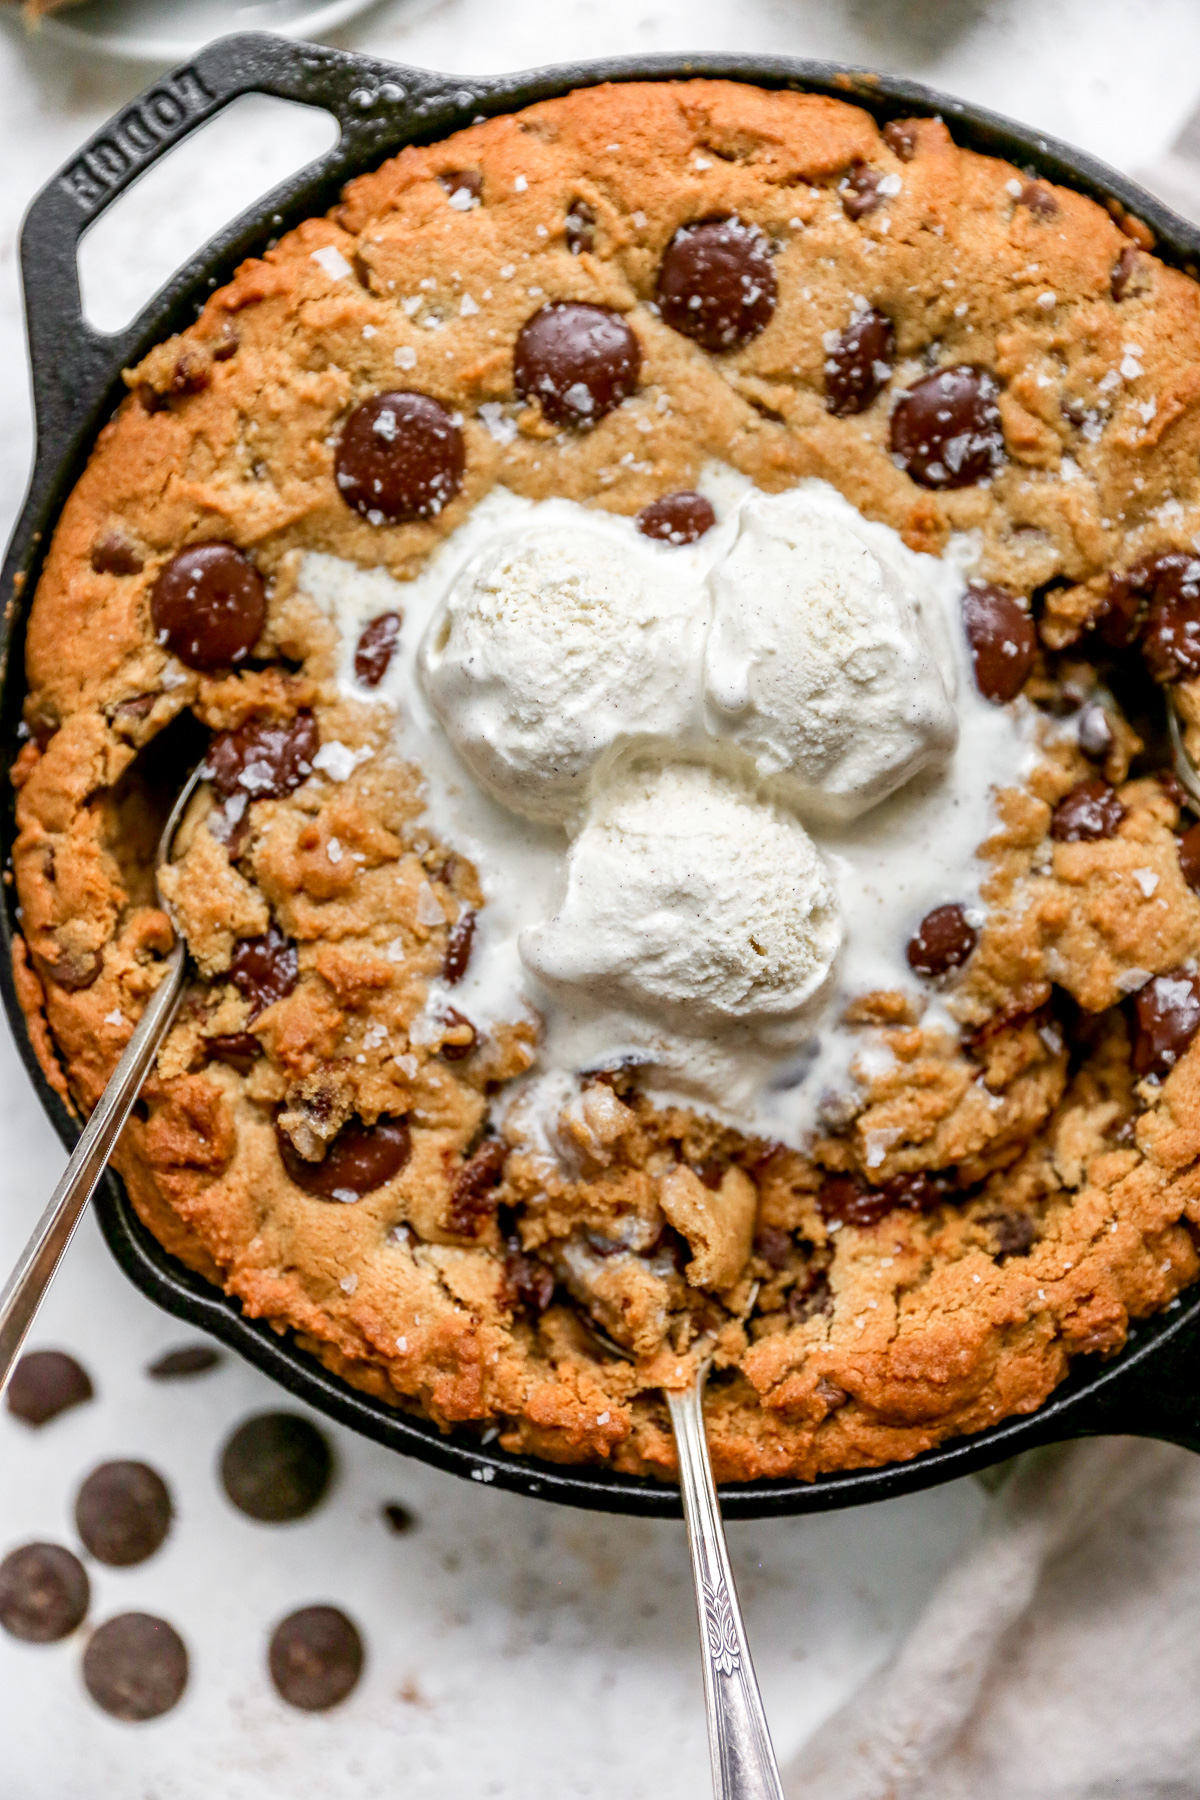 https://yestoyolks.com/wp-content/uploads/2021/09/Spiced-Peanut-Butter-Chocolate-Chip-Skillet-Cookie-8.jpg